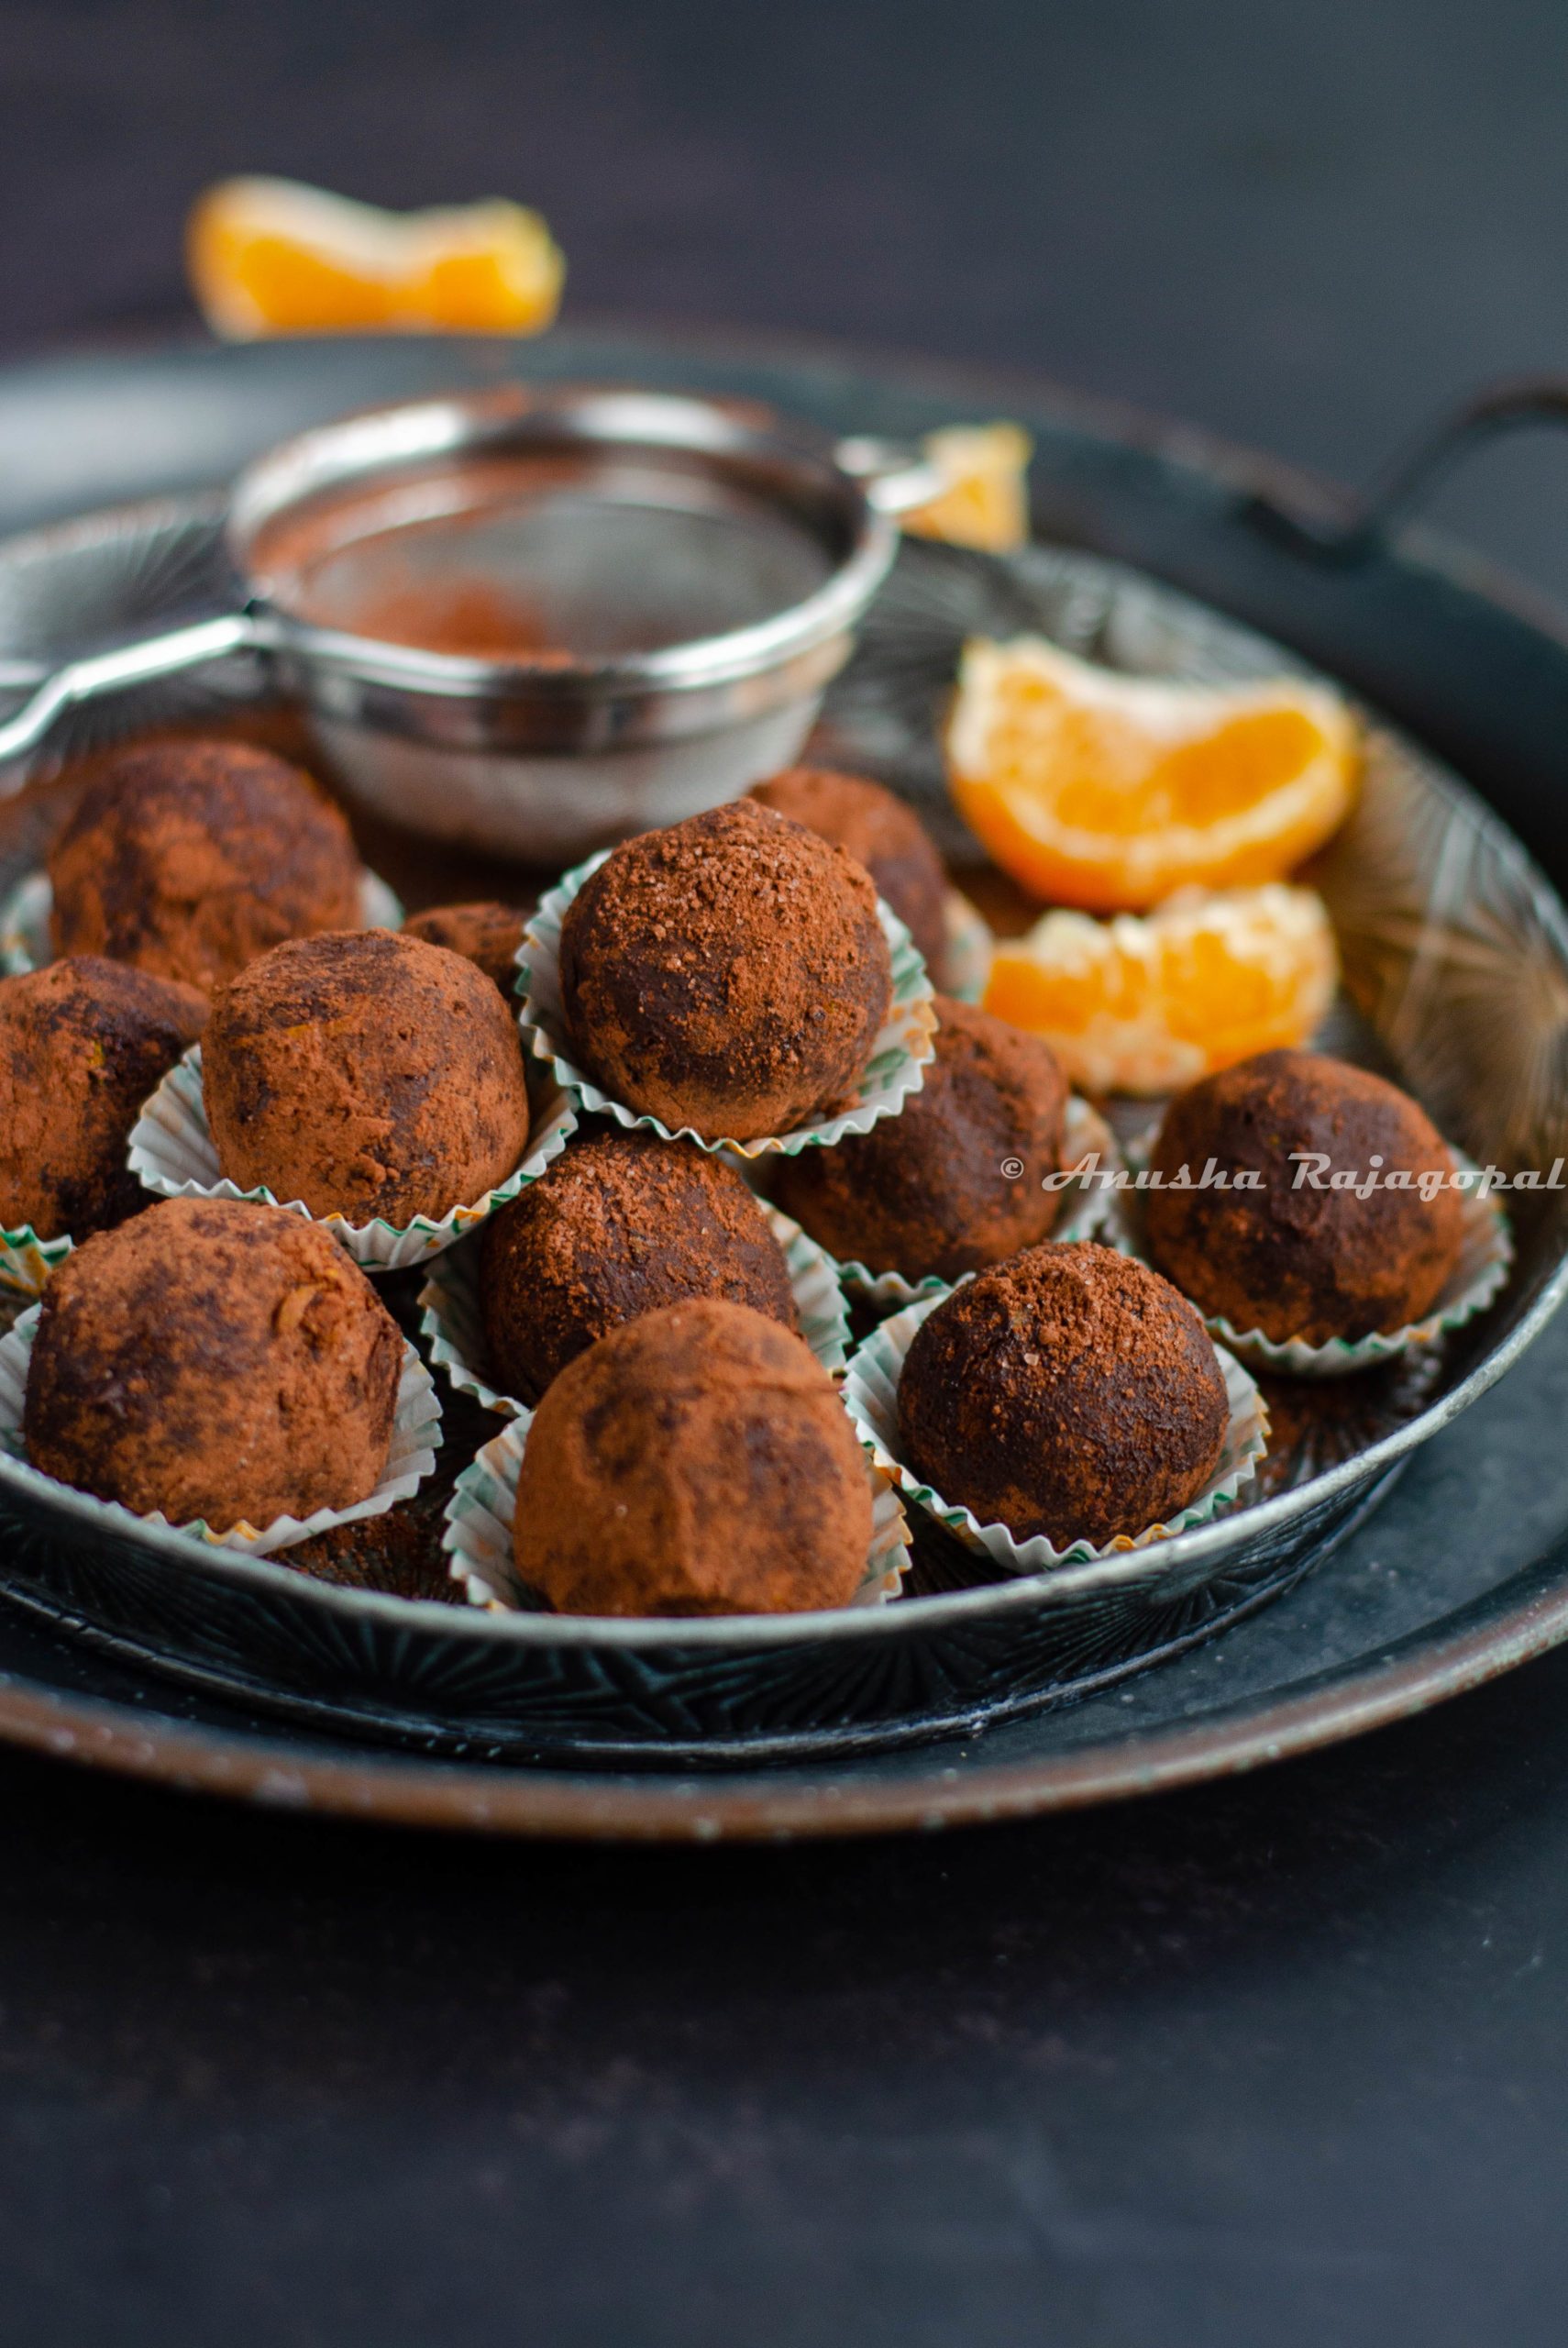 chocolate orange truffles placed on a vintage metal tray